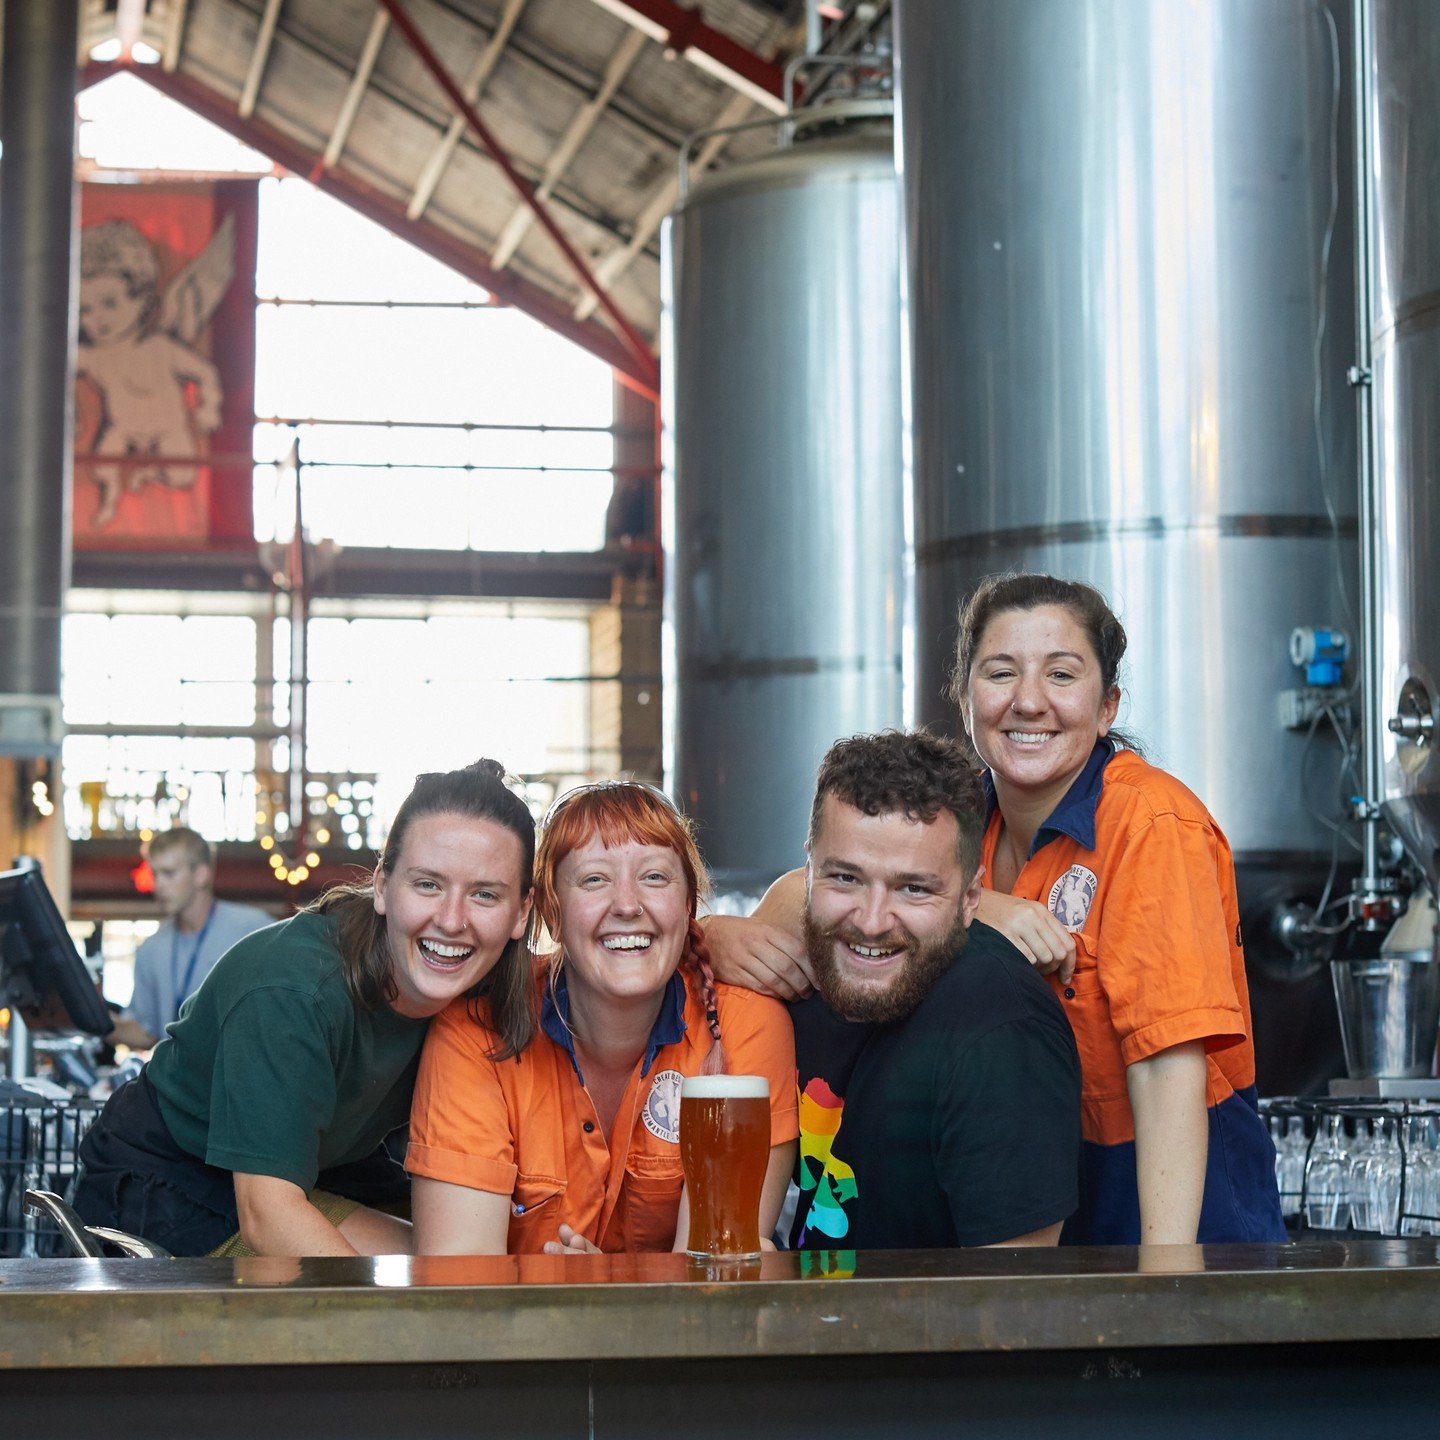 Laughter in the Brewhouse 🤣🍻

Beer tastings in the Little Creatures brewhouse hosted by a professional comedian... now your talking my language! Brewed Laughter commences May 23rd 6:30pm 🙌

For good times &amp; laughter follow the link in story 🤳